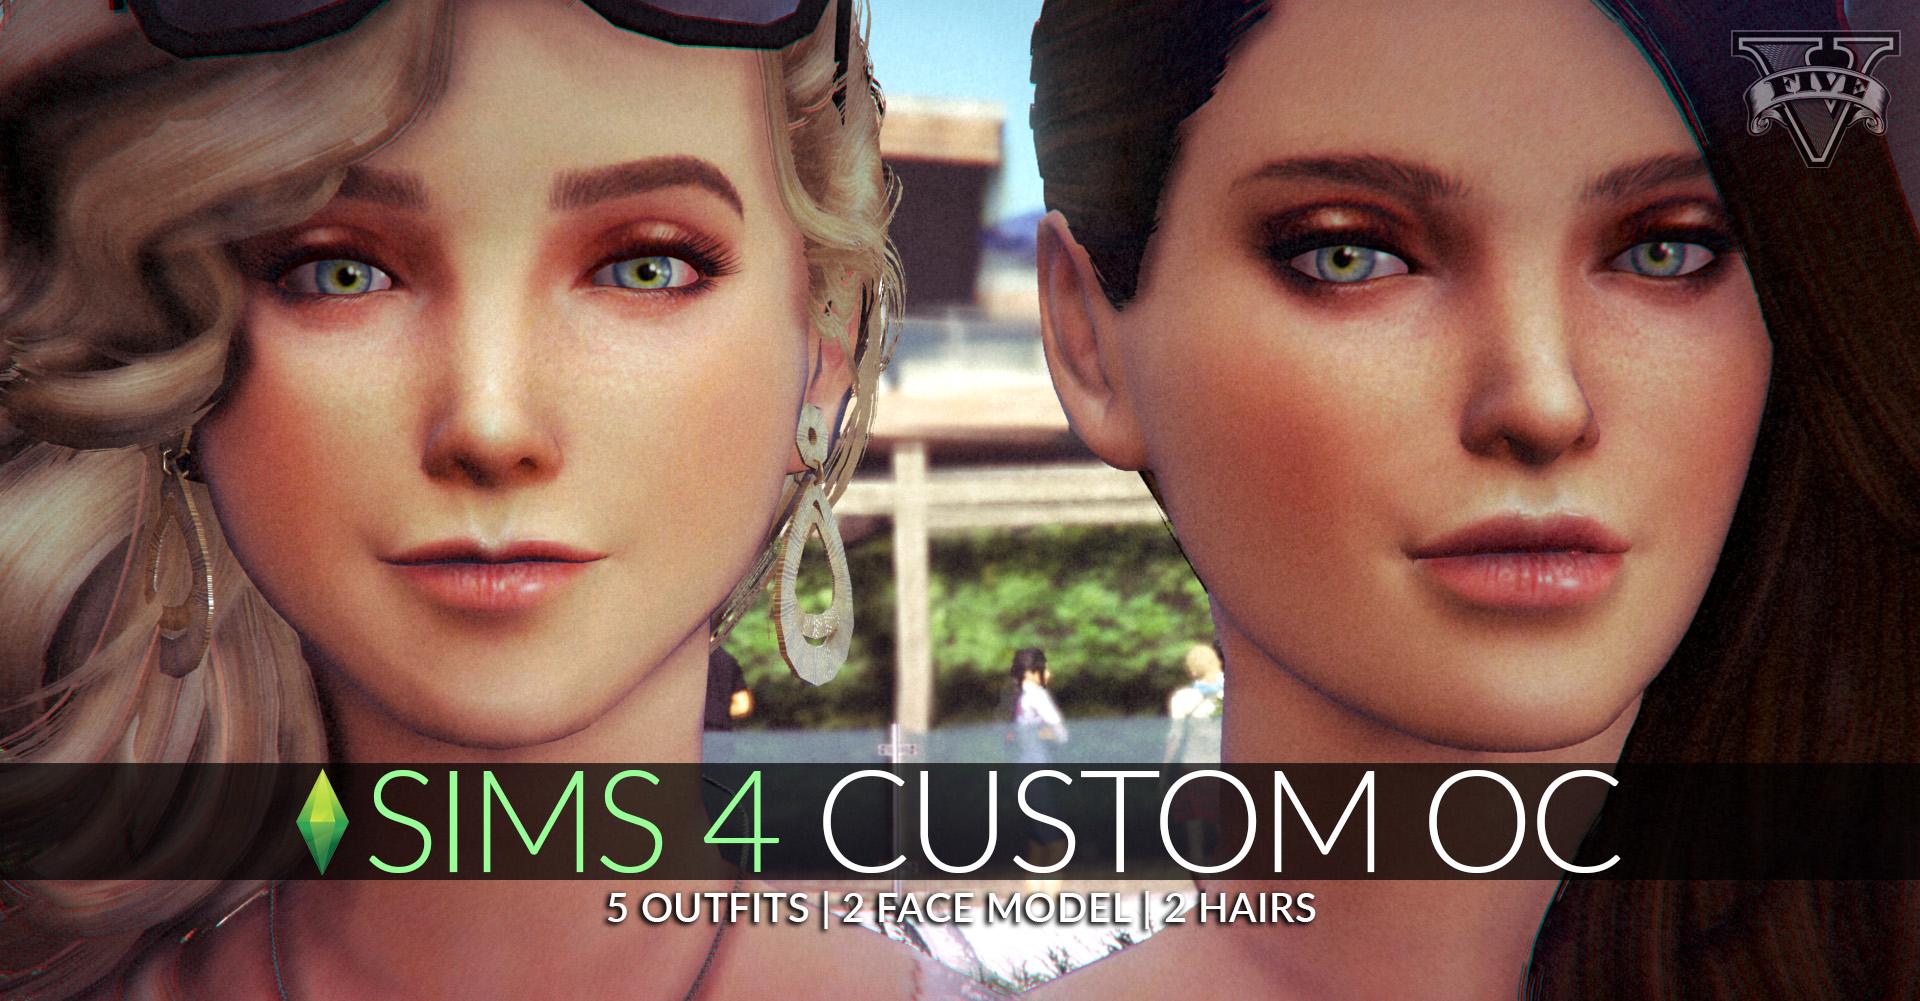 sims 4 custom mods how do they work once downloaded